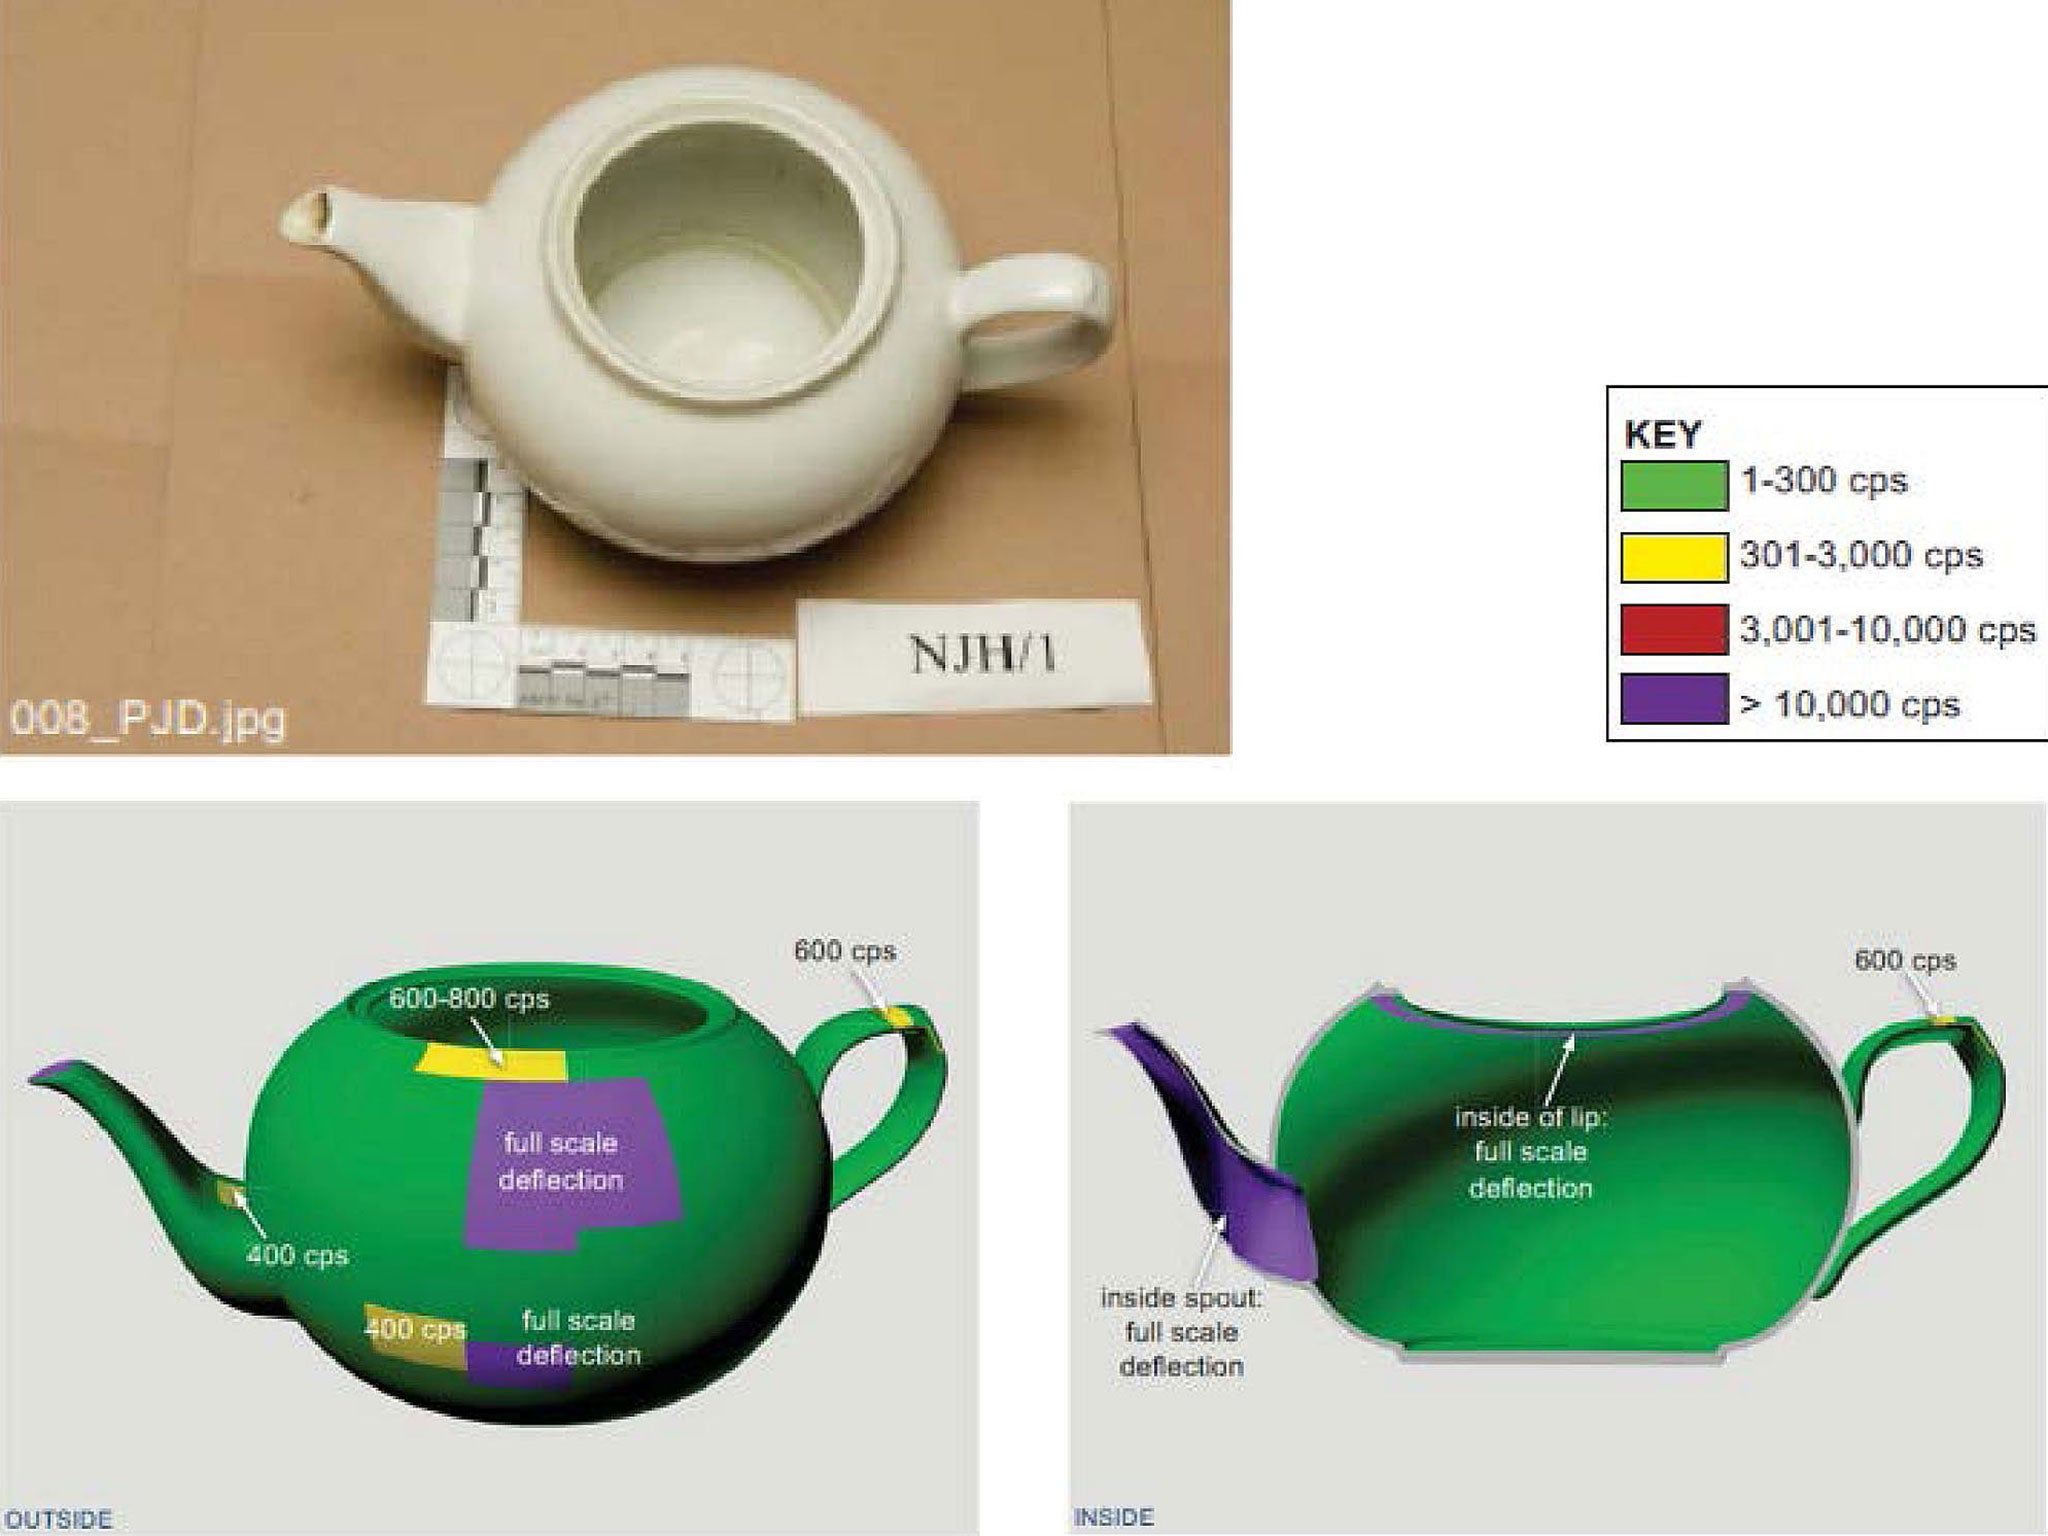 A photo issued by the inquiry of the teapot used to poison Litvinenko with polonium 210